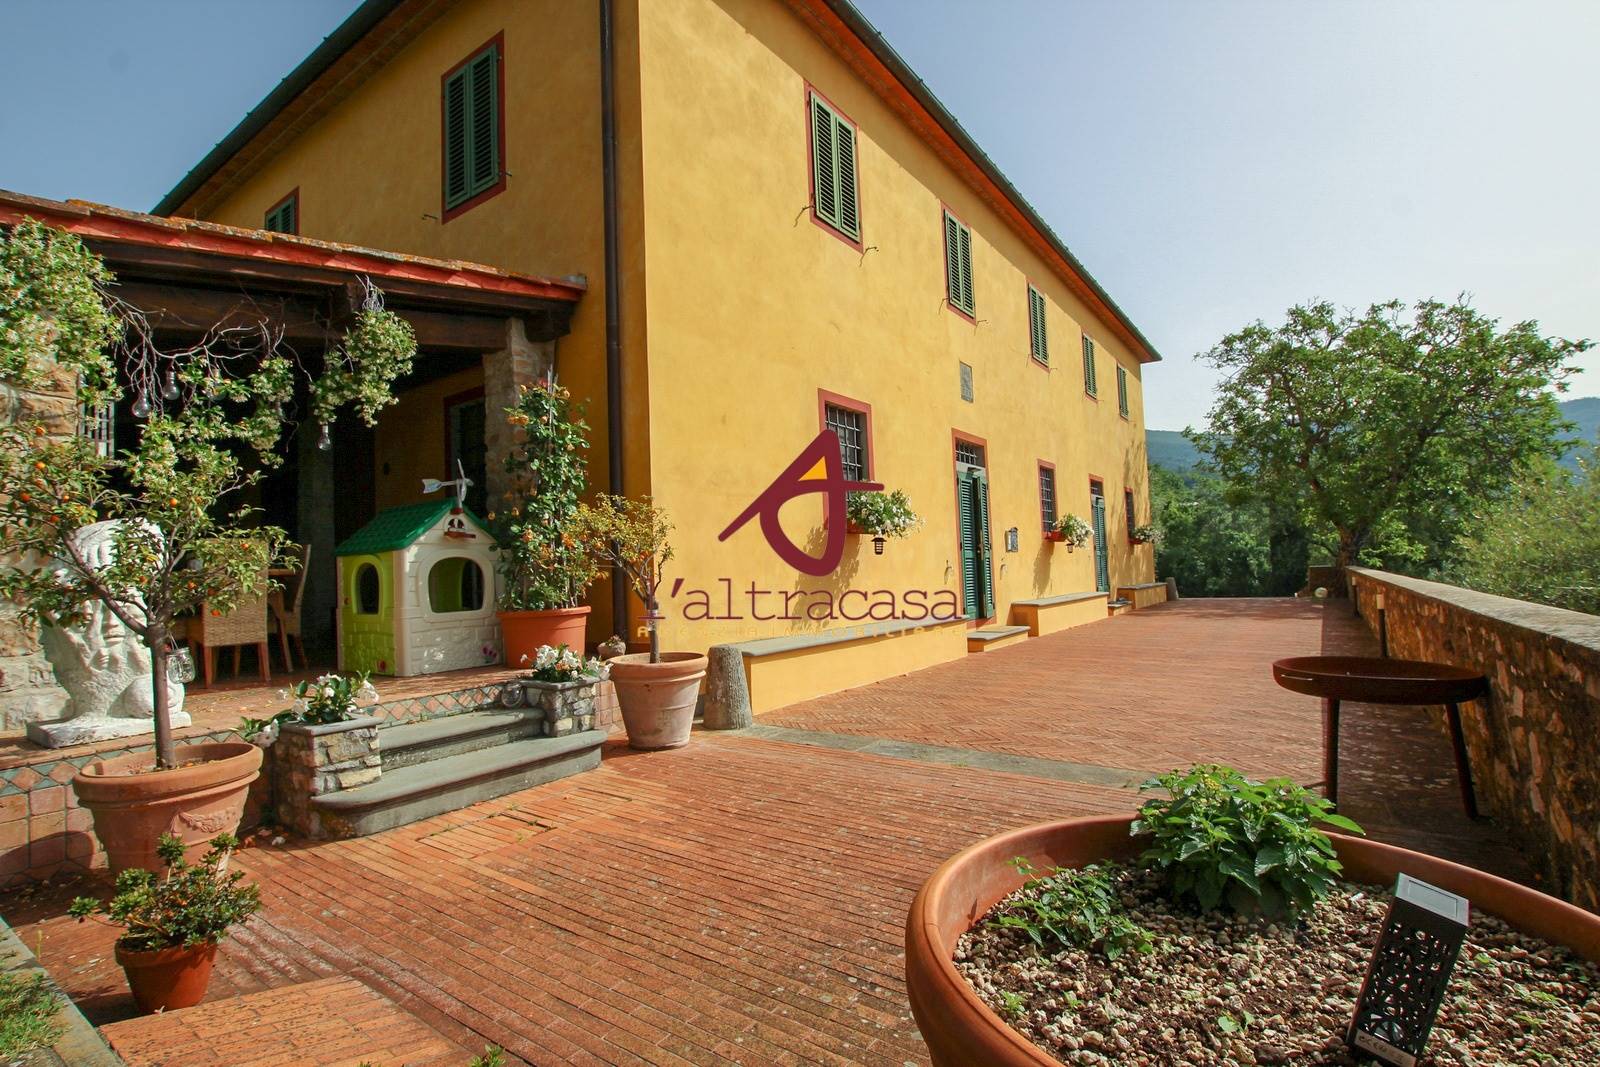 PISTOIA, only 30 minutes far from FLORENCE, amazing country VILLA, dating back to 1823, great view and surrounded by a large garden and a piece of 